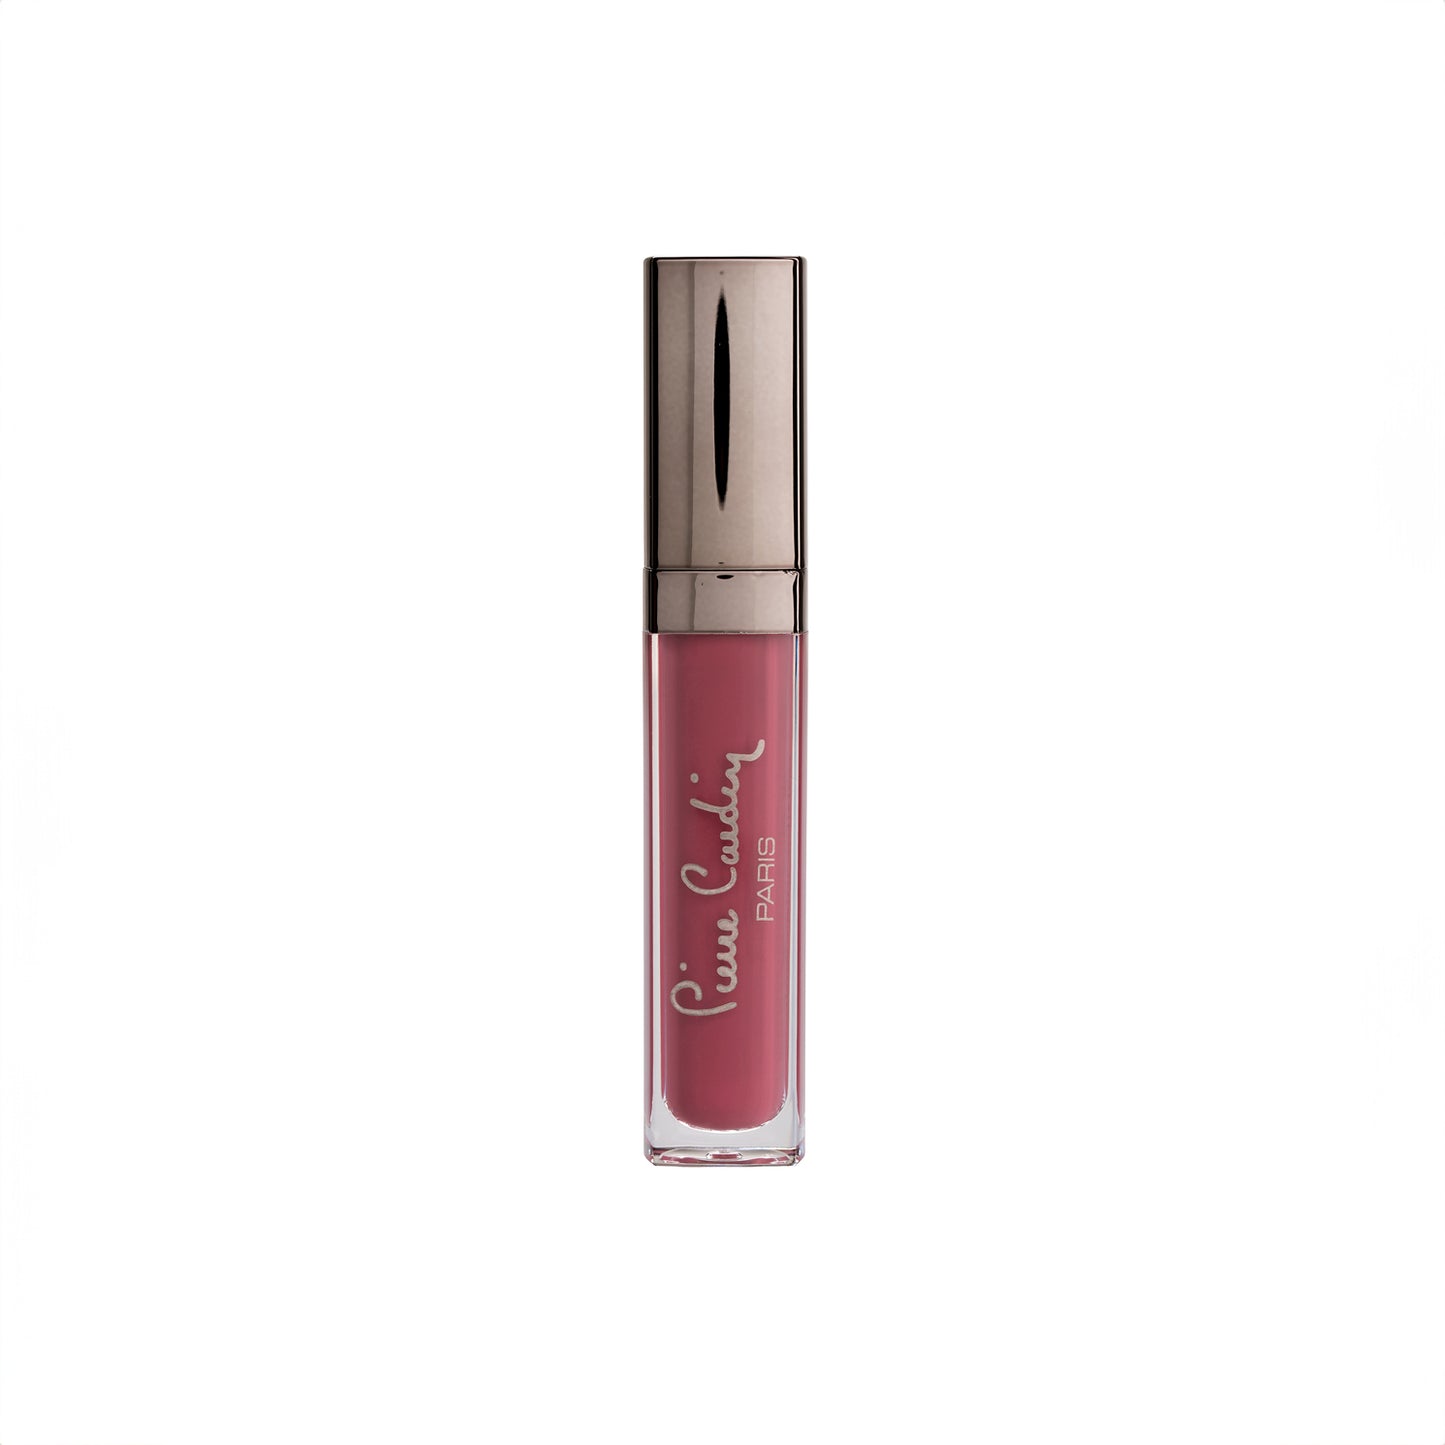 Pierre Cardin Photoflash Lipgloss – Glow Color Edition Roseate 940 - 9 ml